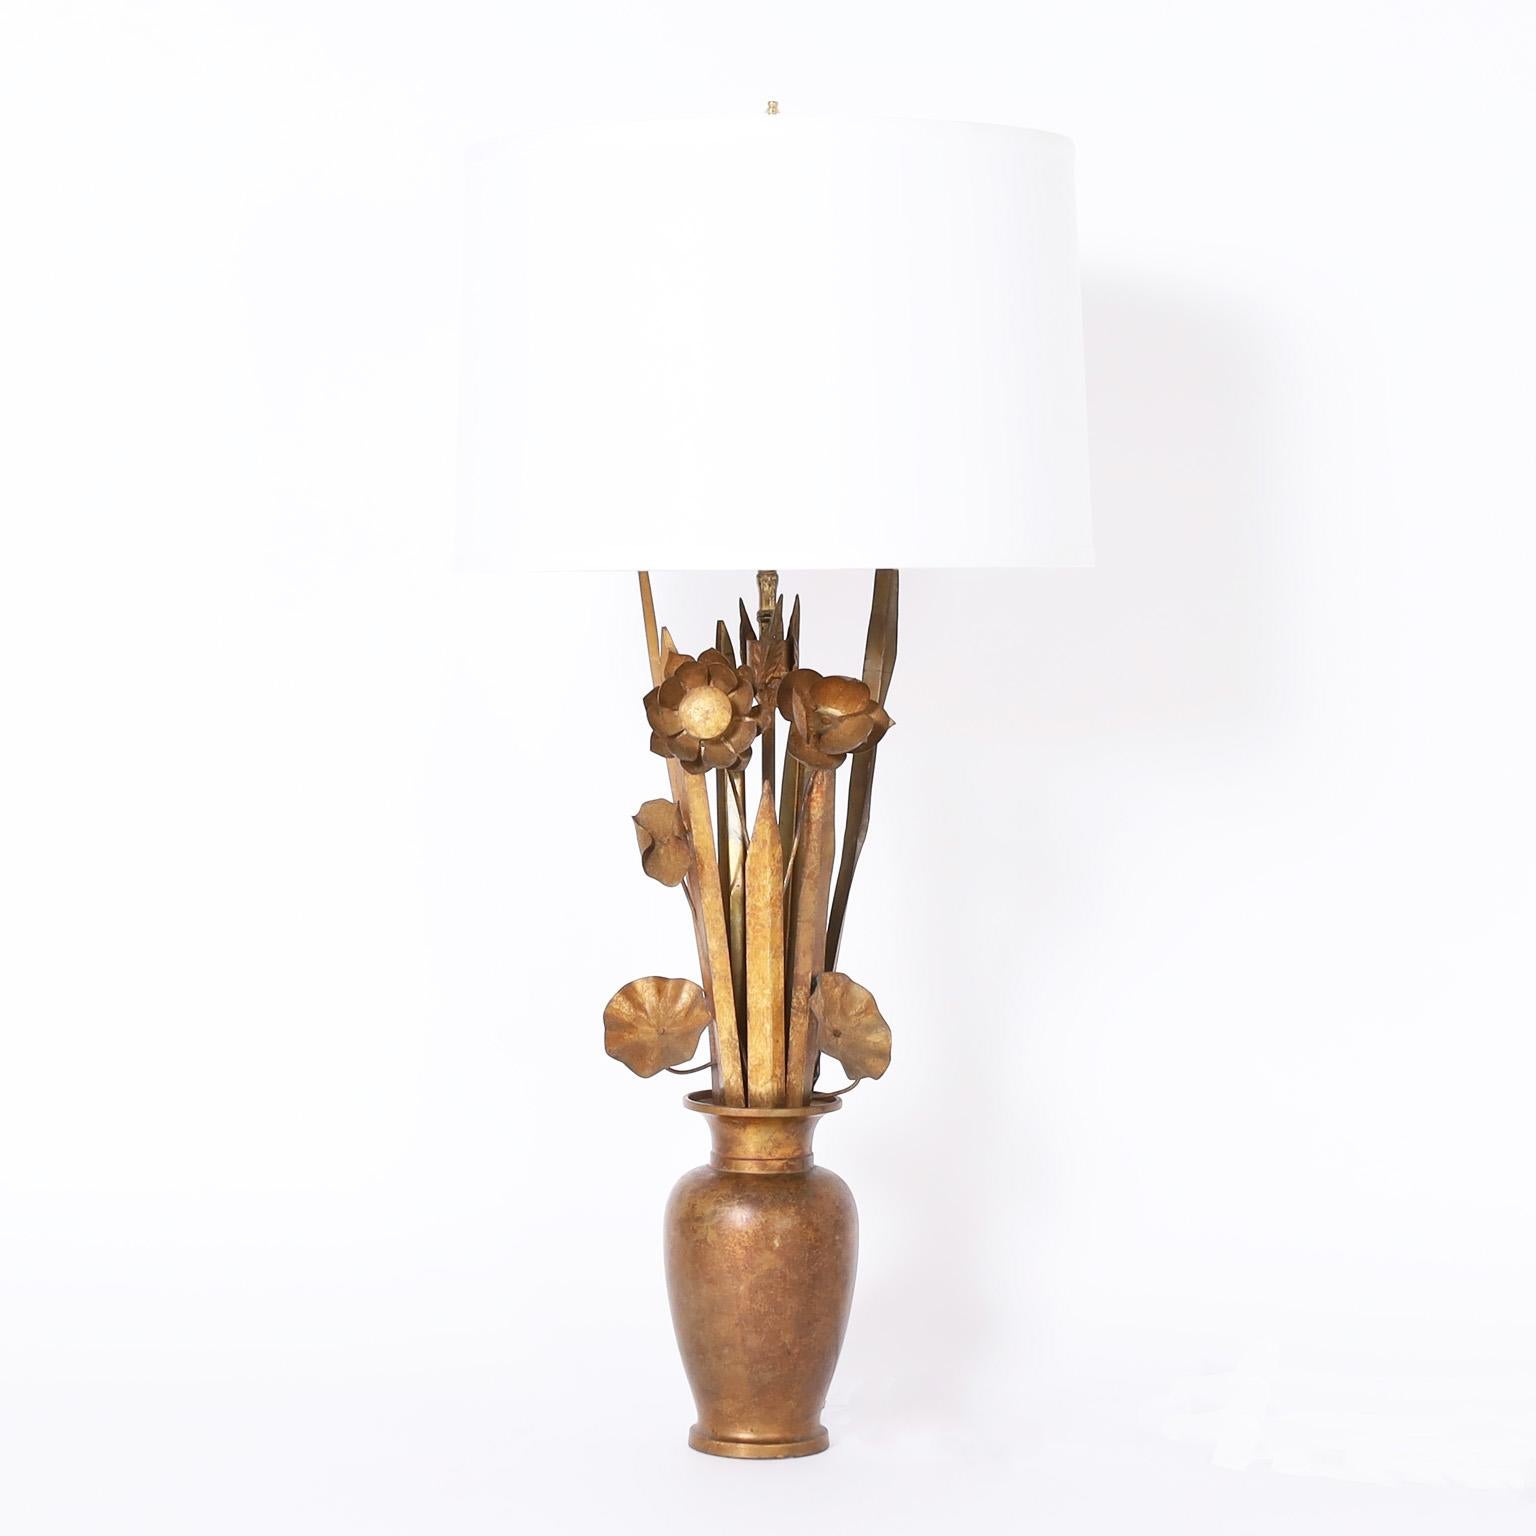 Chic vintage Italian table lamps crafted in metal with gilt finish having a stylized composition of flowers in a vase with the perfect combination of modern and classical influences.